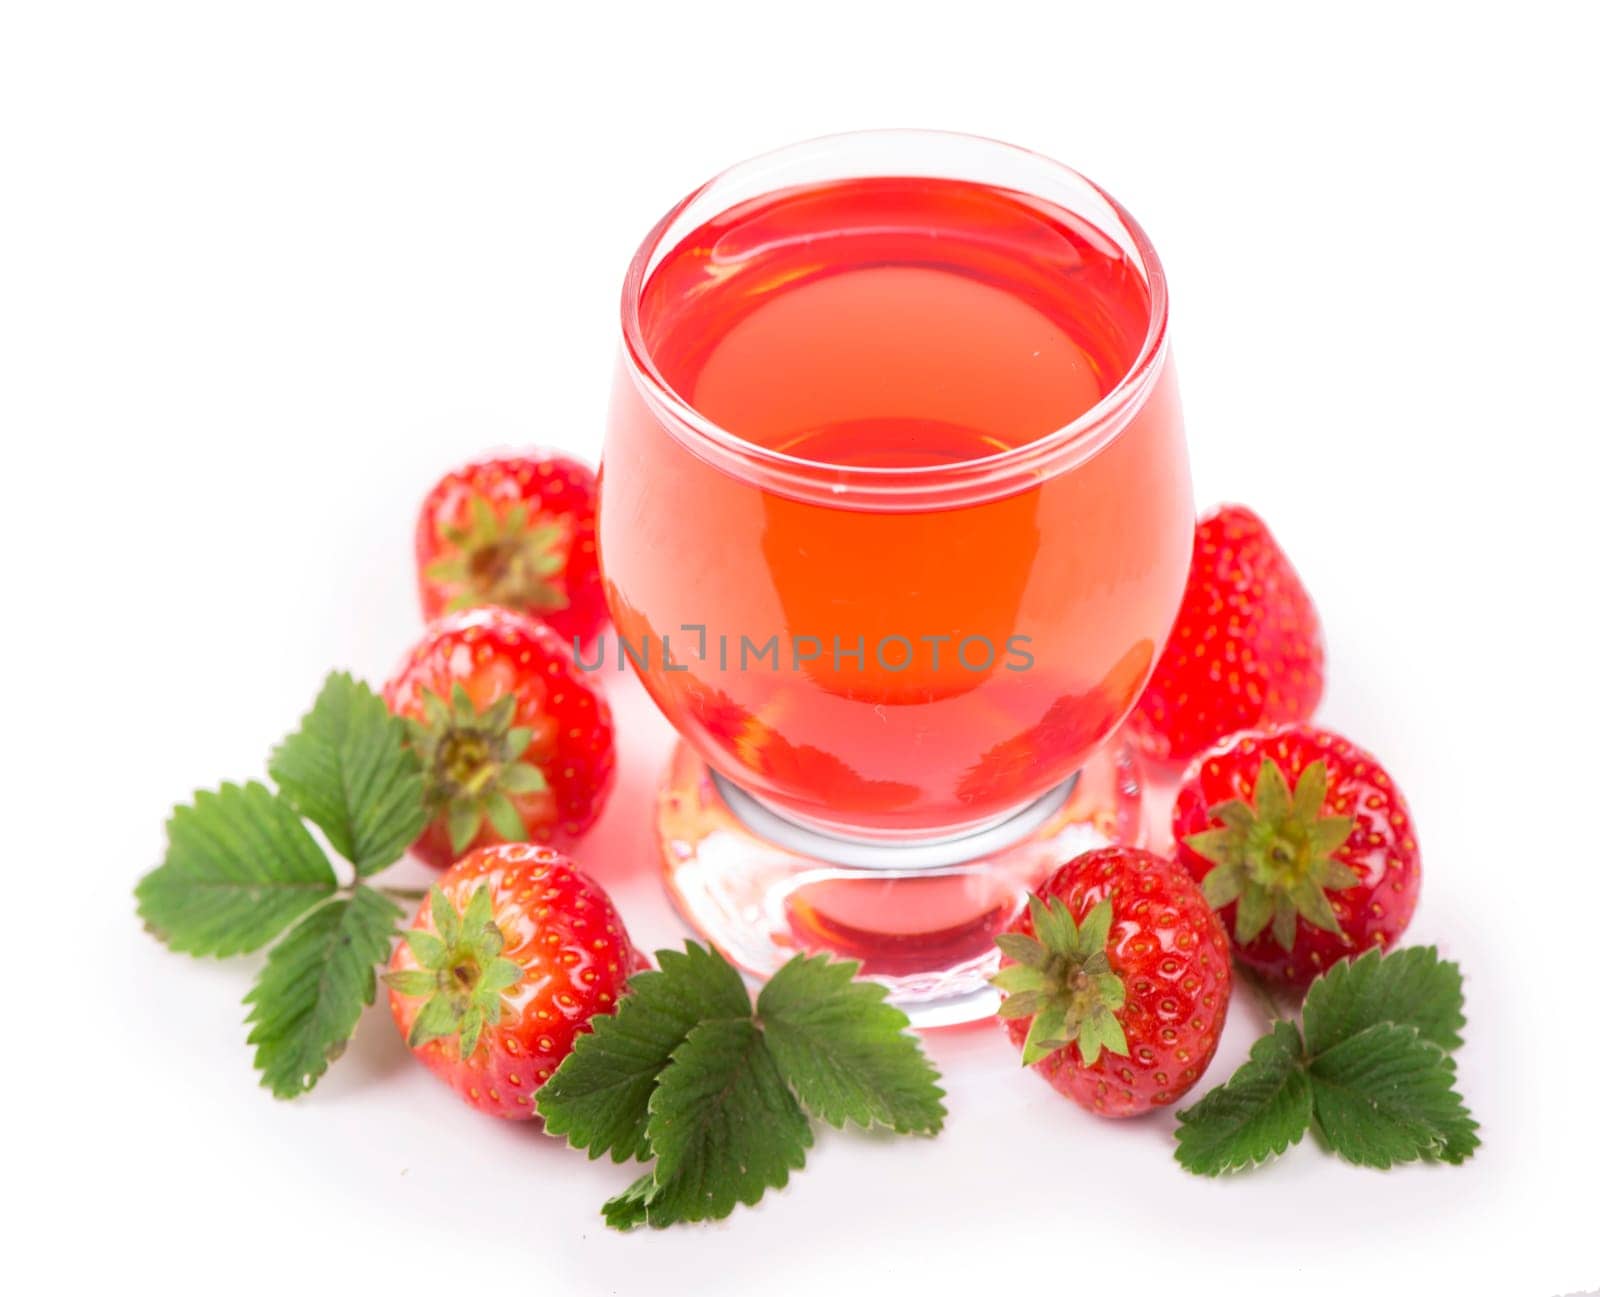 strawberry jelly in glasses with fresh berries and fruits on a white background by aprilphoto